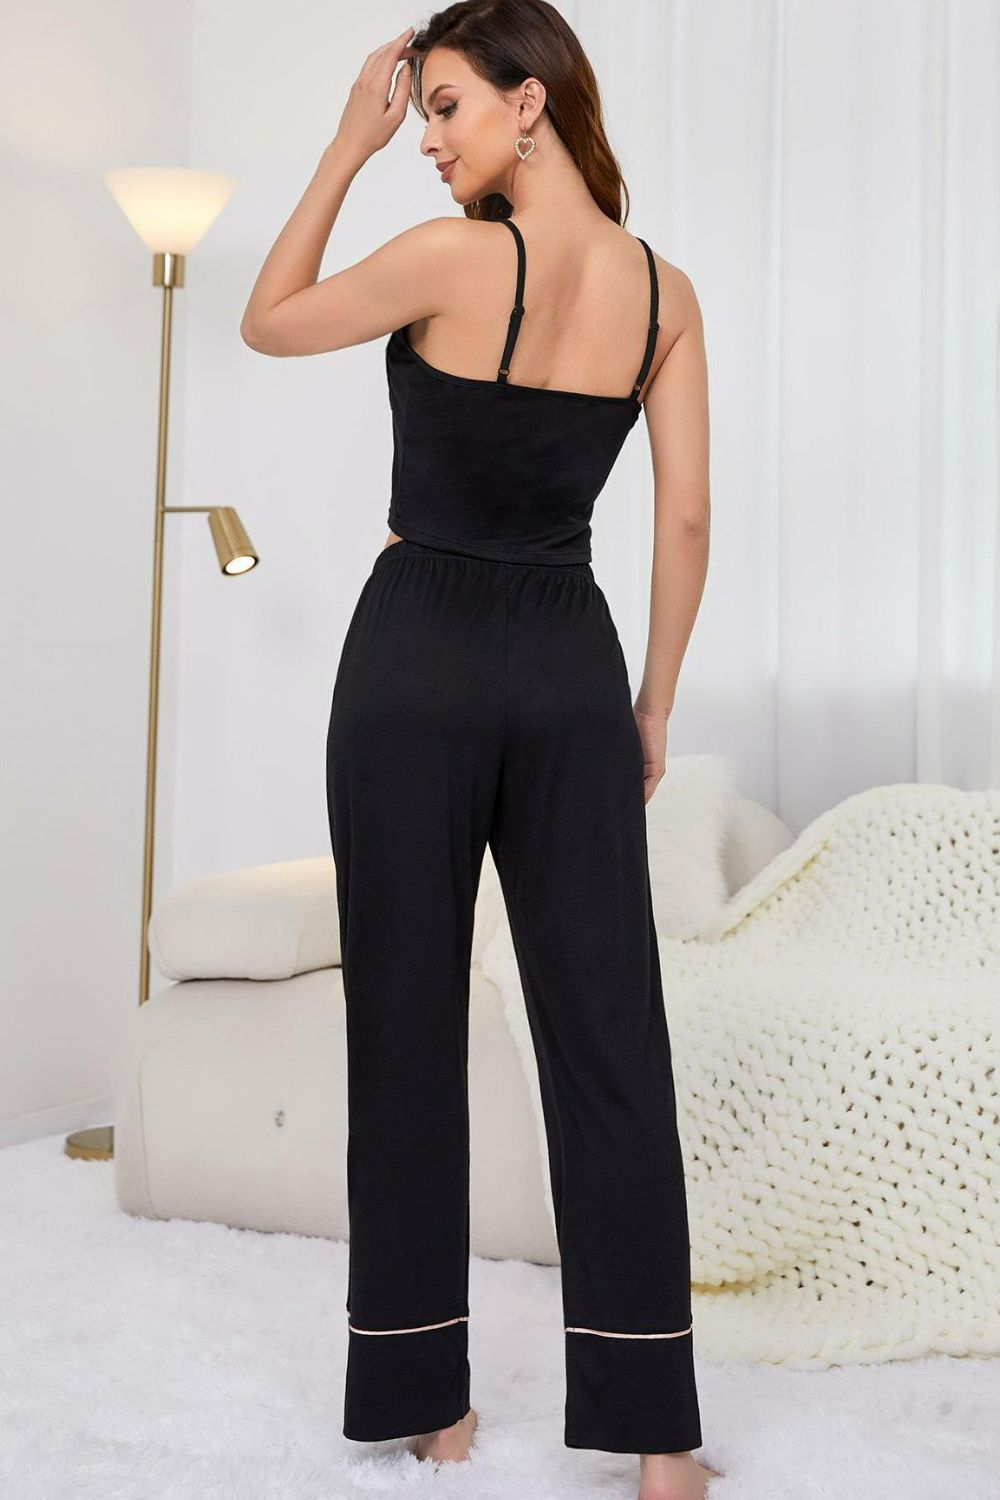 Contrast Trim Cropped Cami and Pants Loungewear Set - Girl Code